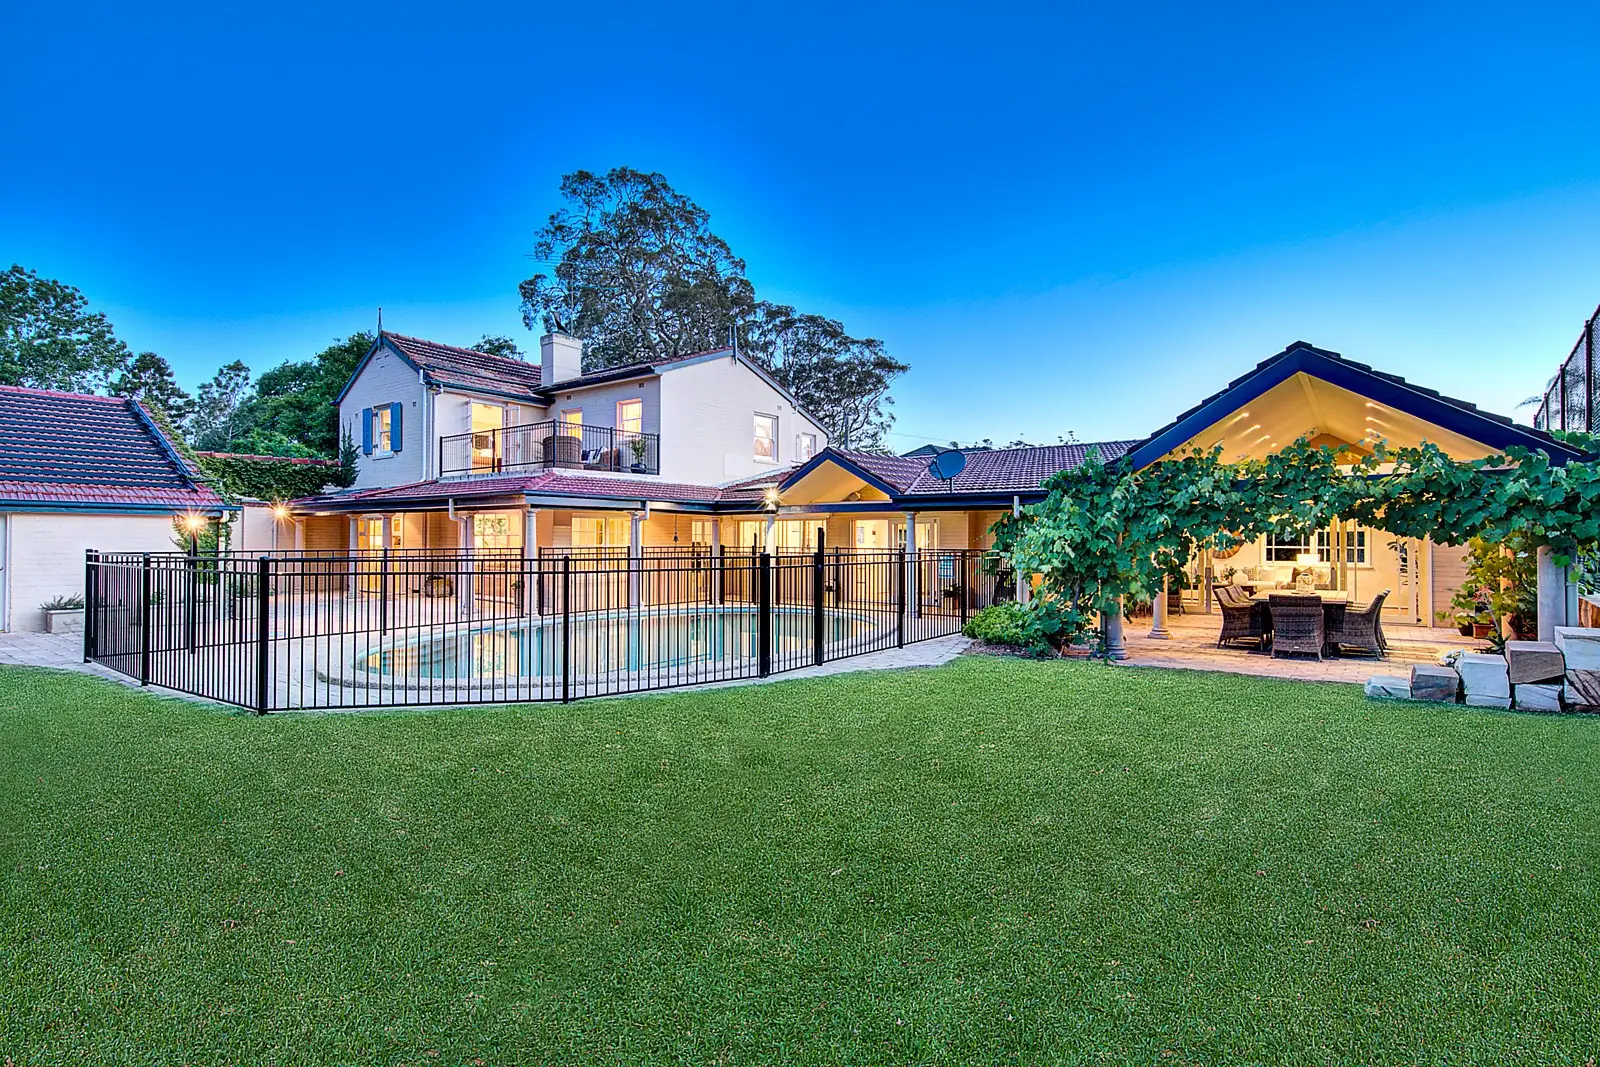 Photo #1: 8 Macquarie Road, Pymble - Sold by Sydney Sotheby's International Realty